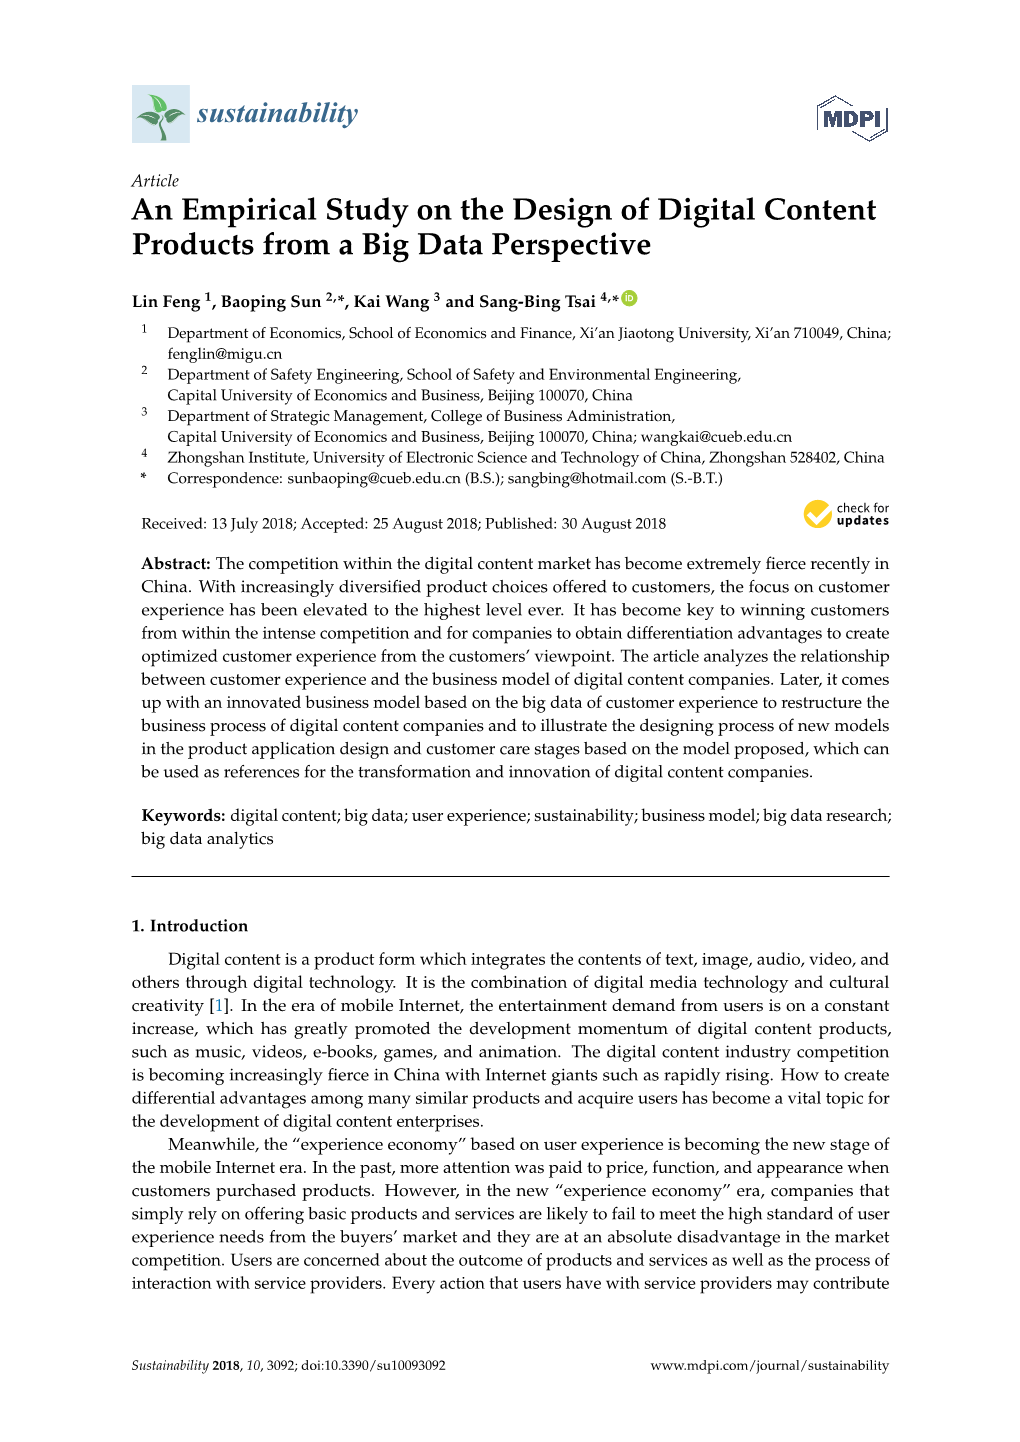 An Empirical Study on the Design of Digital Content Products from a Big Data Perspective